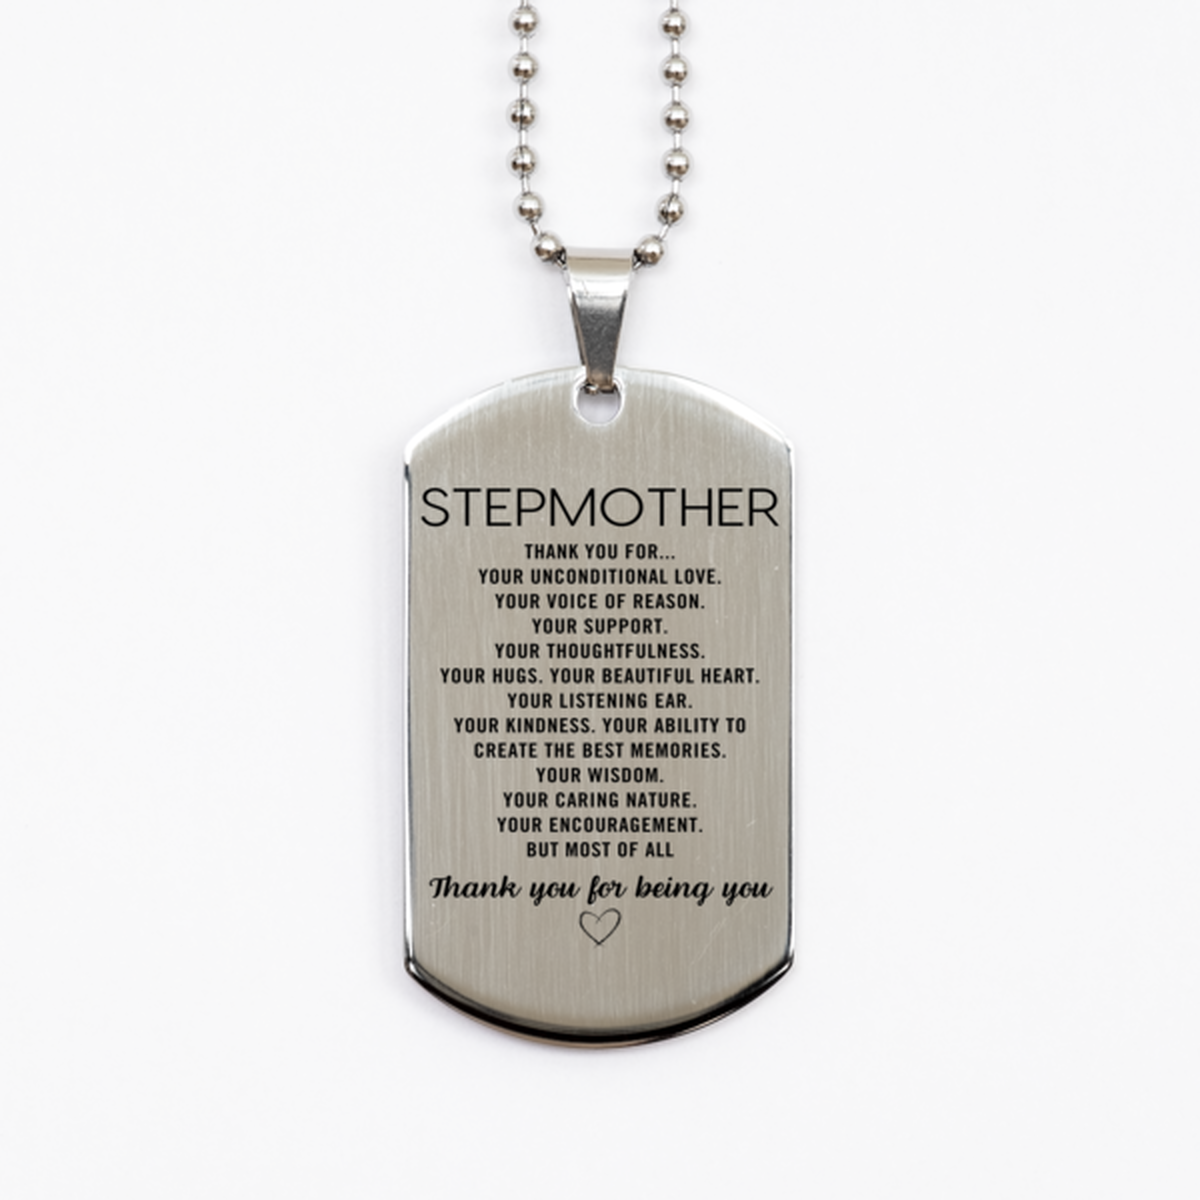 Stepmother Silver Dog Tag Custom, Engraved Gifts For Stepmother Christmas Graduation Birthday Gifts for Men Women Stepmother Thank you for Your unconditional love